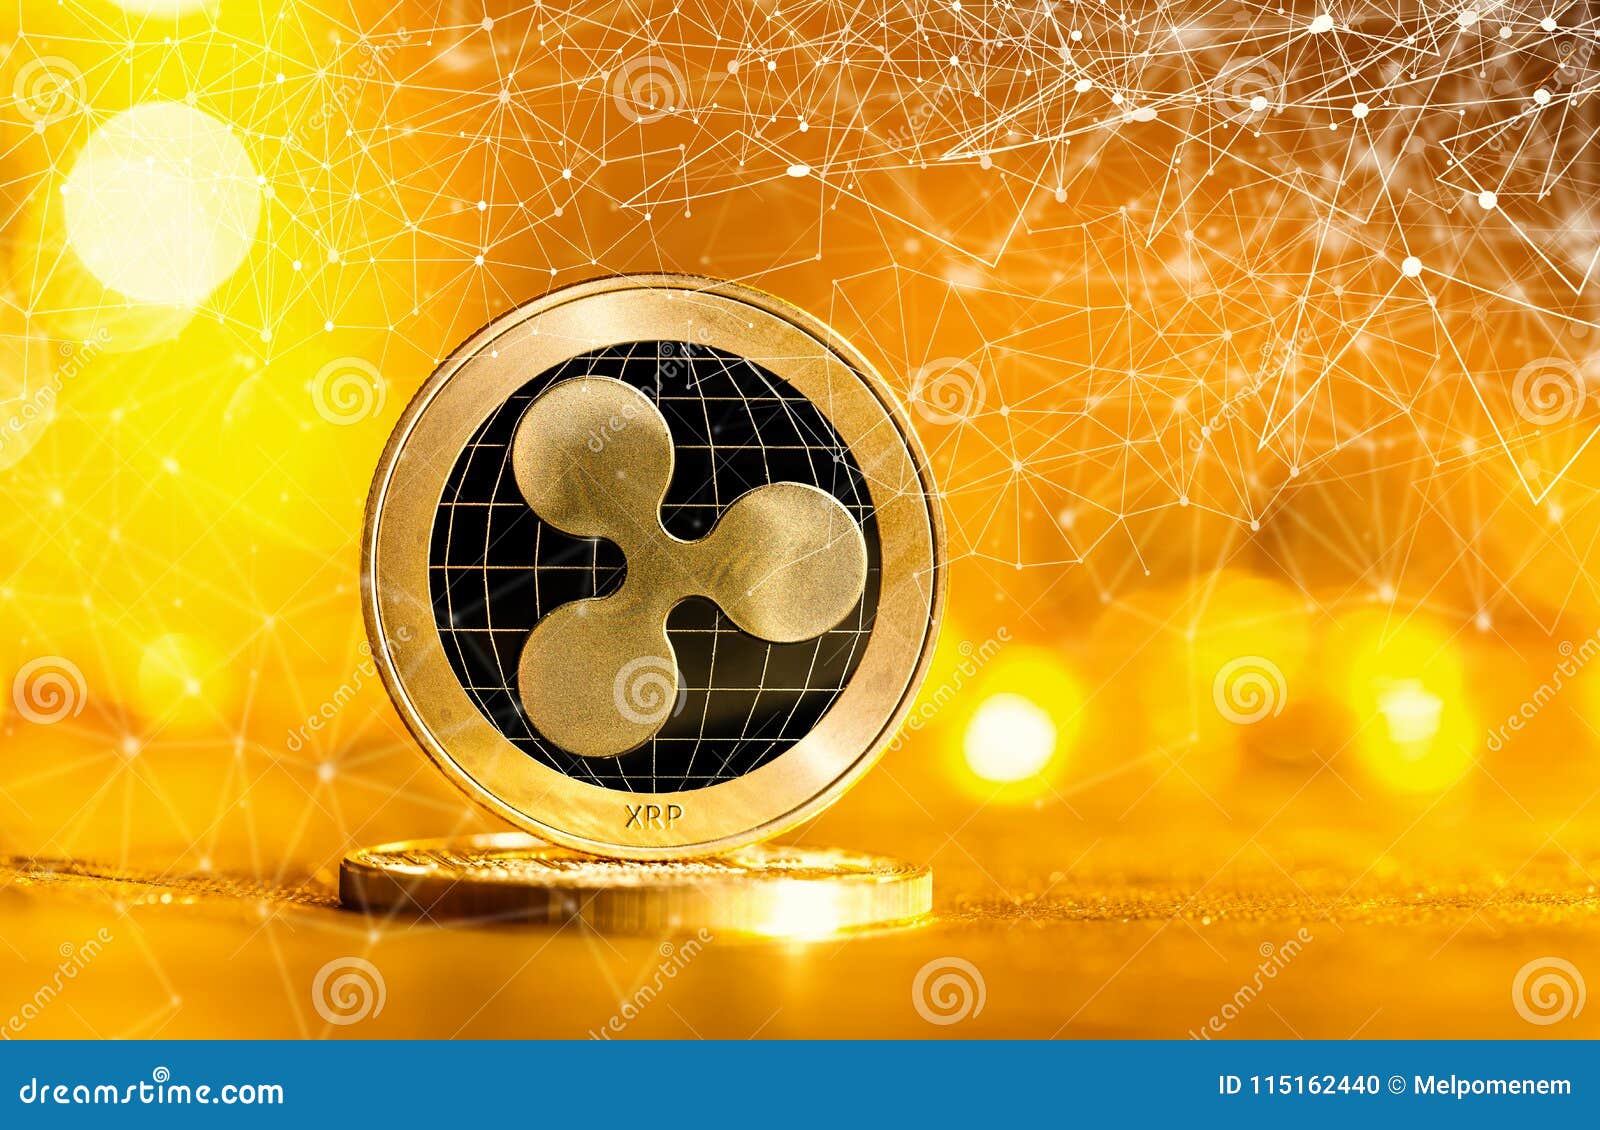 Ripple cryptocurrency coin stock photo. Image of concept ...